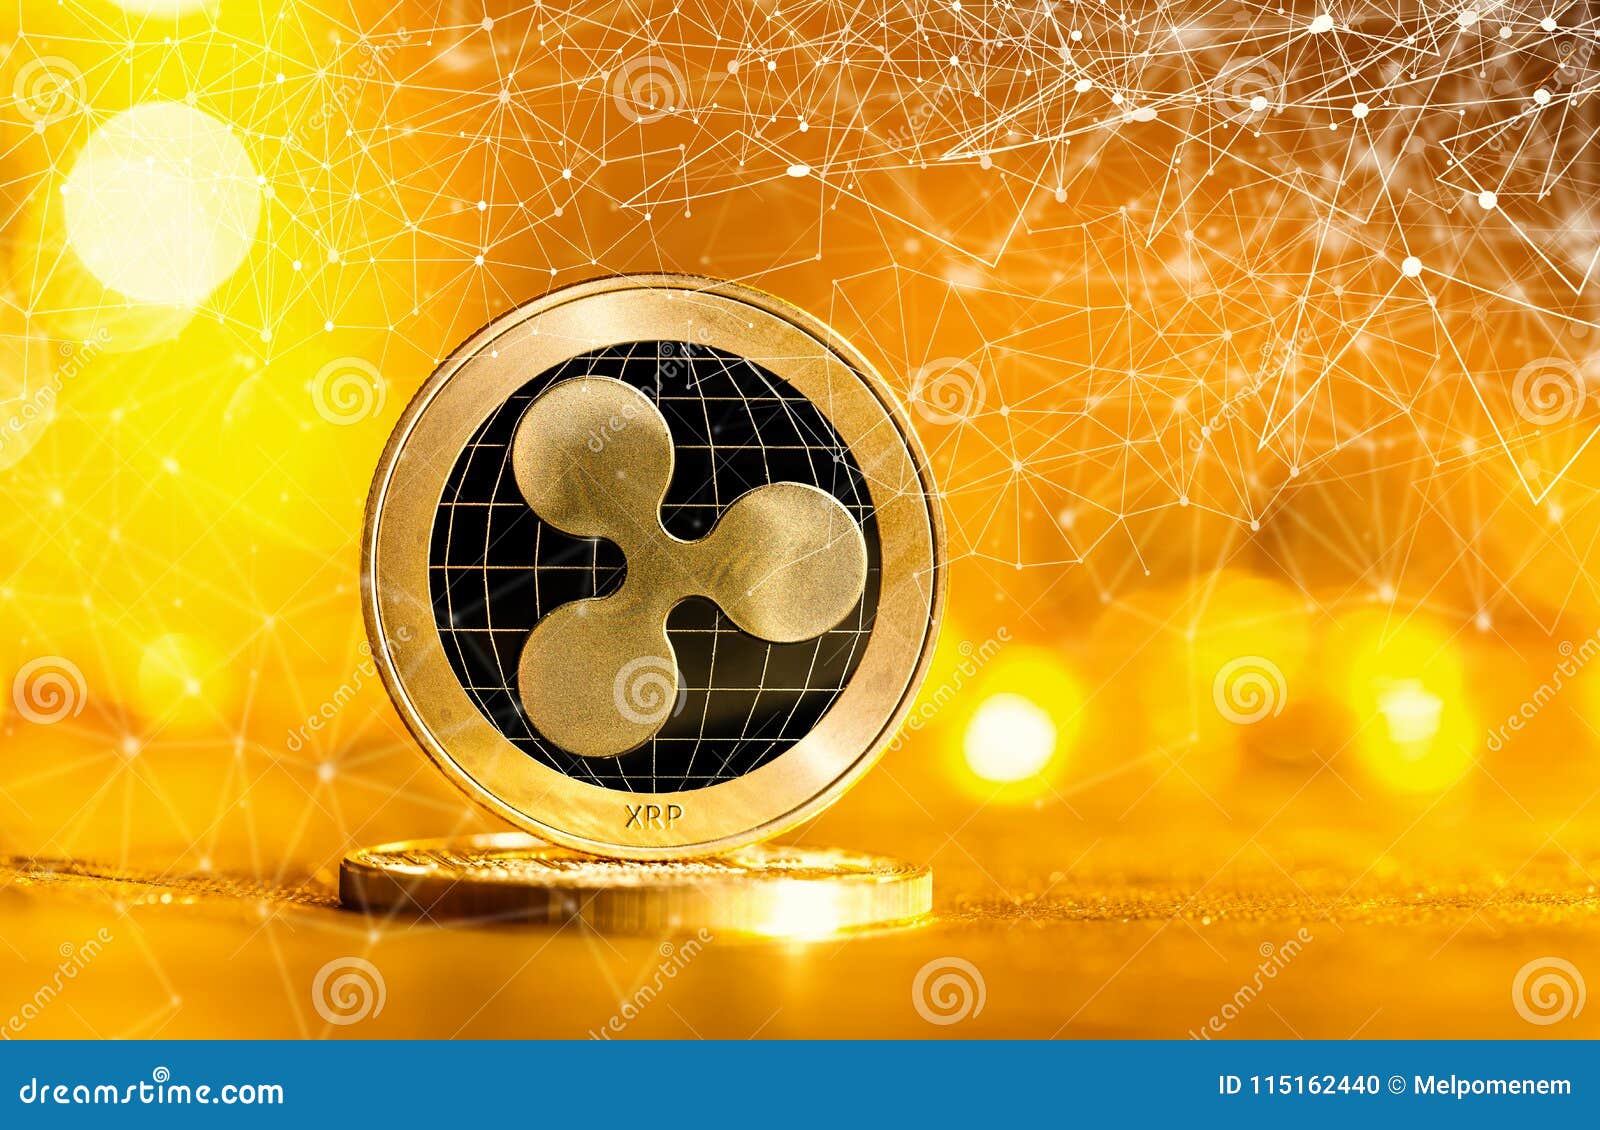 Ripple cryptocurrency coin stock photo. Image of concept ...